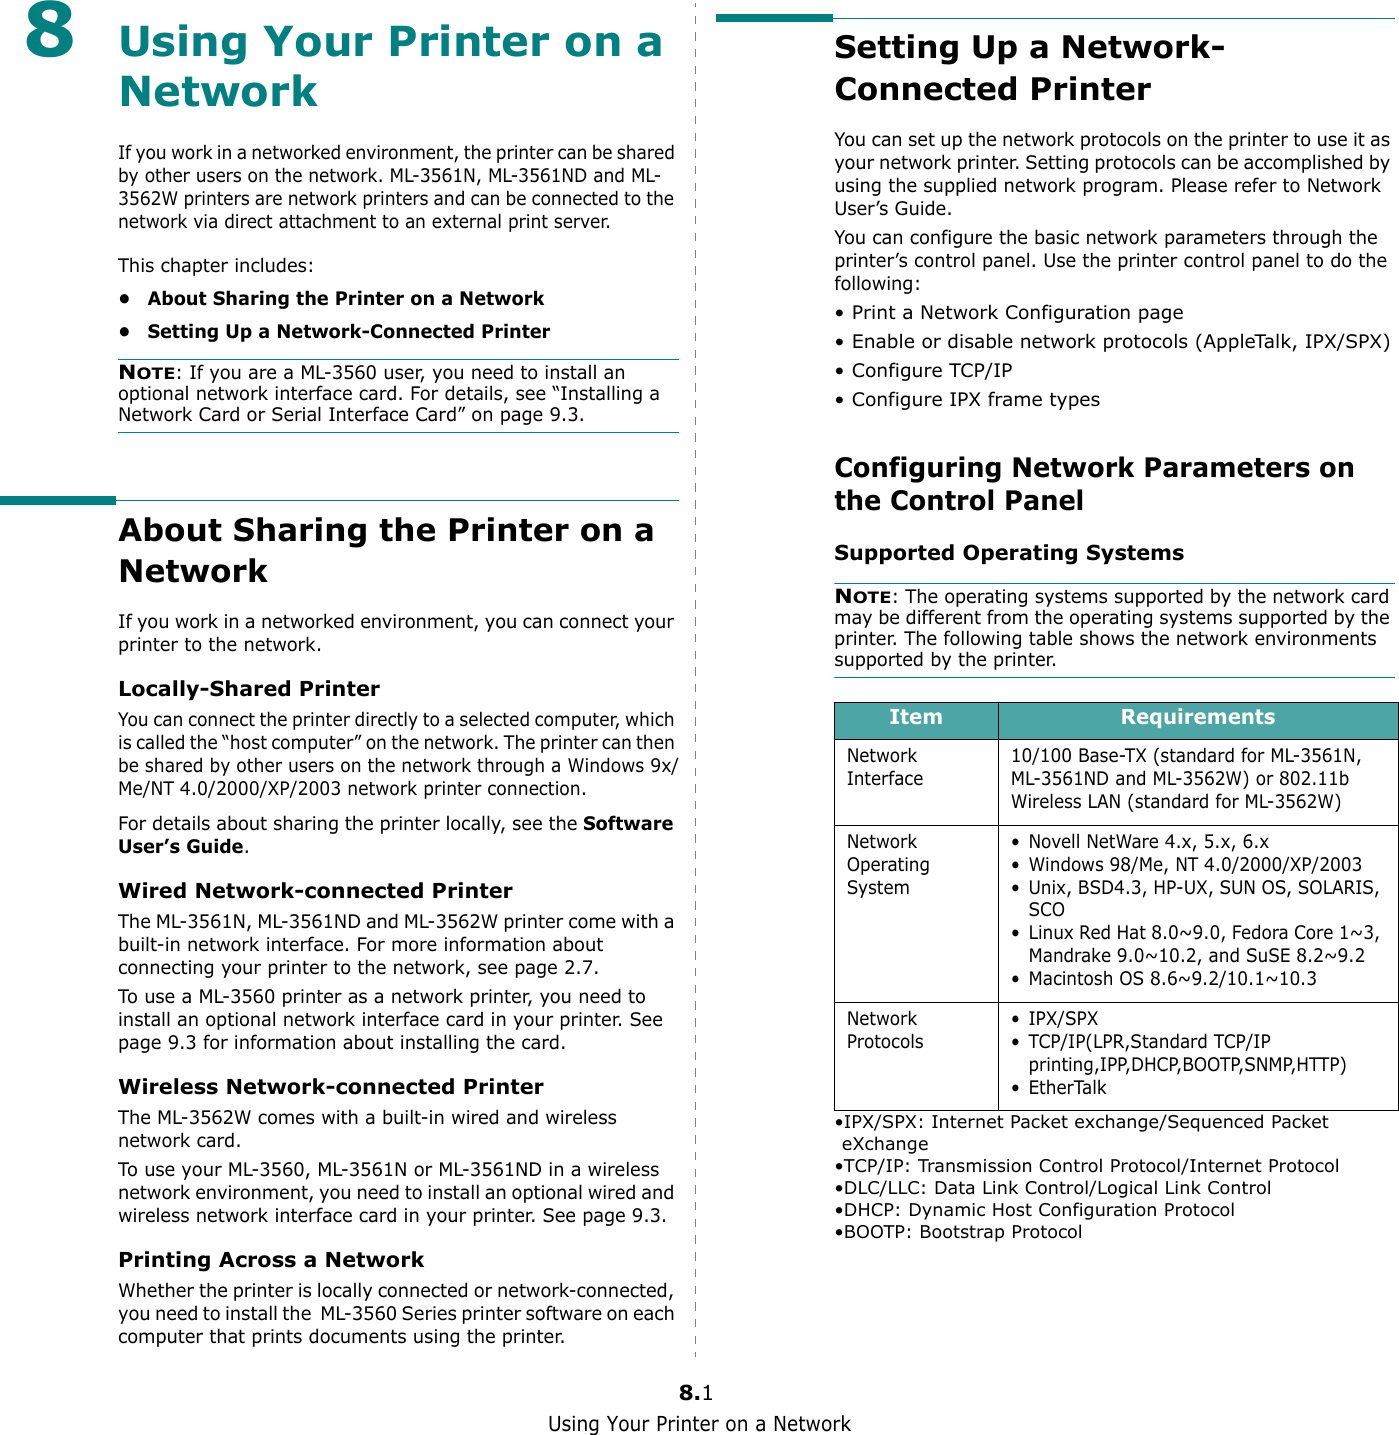 Using Your Printer on a Network8.18Using Your Printer on a NetworkIf you work in a networked environment, the printer can be shared by other users on the network. ML-3561N, ML-3561ND and ML-3562W printers are network printers and can be connected to the network via direct attachment to an external print server.This chapter includes:• About Sharing the Printer on a Network• Setting Up a Network-Connected PrinterNOTE: If you are a ML-3560 user, you need to install an optional network interface card. For details, see “Installing a Network Card or Serial Interface Card” on page 9.3.About Sharing the Printer on a NetworkIf you work in a networked environment, you can connect your printer to the network.Locally-Shared PrinterYou can connect the printer directly to a selected computer, which is called the “host computer” on the network. The printer can then be shared by other users on the network through a Windows 9x/Me/NT 4.0/2000/XP/2003 network printer connection.For details about sharing the printer locally, see the Software User’s Guide.Wired Network-connected PrinterThe ML-3561N, ML-3561ND and ML-3562W printer come with a built-in network interface. For more information about connecting your printer to the network, see page 2.7.To use a ML-3560 printer as a network printer, you need to install an optional network interface card in your printer. See page 9.3 for information about installing the card.Wireless Network-connected PrinterThe ML-3562W comes with a built-in wired and wireless network card.To use your ML-3560, ML-3561N or ML-3561ND in a wireless network environment, you need to install an optional wired and wireless network interface card in your printer. See page 9.3.Printing Across a NetworkWhether the printer is locally connected or network-connected, you need to install the  ML-3560 Series printer software on each computer that prints documents using the printer.Setting Up a Network-Connected PrinterYou can set up the network protocols on the printer to use it as your network printer. Setting protocols can be accomplished by using the supplied network program. Please refer to Network User’s Guide. You can configure the basic network parameters through the printer’s control panel. Use the printer control panel to do the following:• Print a Network Configuration page• Enable or disable network protocols (AppleTalk, IPX/SPX)• Configure TCP/IP• Configure IPX frame types Configuring Network Parameters on the Control PanelSupported Operating SystemsNOTE: The operating systems supported by the network card may be different from the operating systems supported by the printer. The following table shows the network environments supported by the printer. •IPX/SPX: Internet Packet exchange/Sequenced Packet eXchange•TCP/IP: Transmission Control Protocol/Internet Protocol•DLC/LLC: Data Link Control/Logical Link Control•DHCP: Dynamic Host Configuration Protocol•BOOTP: Bootstrap ProtocolItem RequirementsNetwork Interface10/100 Base-TX (standard for ML-3561N, ML-3561ND and ML-3562W) or 802.11b Wireless LAN (standard for ML-3562W)Network Operating System• Novell NetWare 4.x, 5.x, 6.x• Windows 98/Me, NT 4.0/2000/XP/2003• Unix, BSD4.3, HP-UX, SUN OS, SOLARIS, SCO• Linux Red Hat 8.0~9.0, Fedora Core 1~3, Mandrake 9.0~10.2, and SuSE 8.2~9.2• Macintosh OS 8.6~9.2/10.1~10.3Network Protocols• IPX/SPX•TCP/IP(LPR,Standard TCP/IP printing,IPP,DHCP,BOOTP,SNMP,HTTP) •EtherTalk